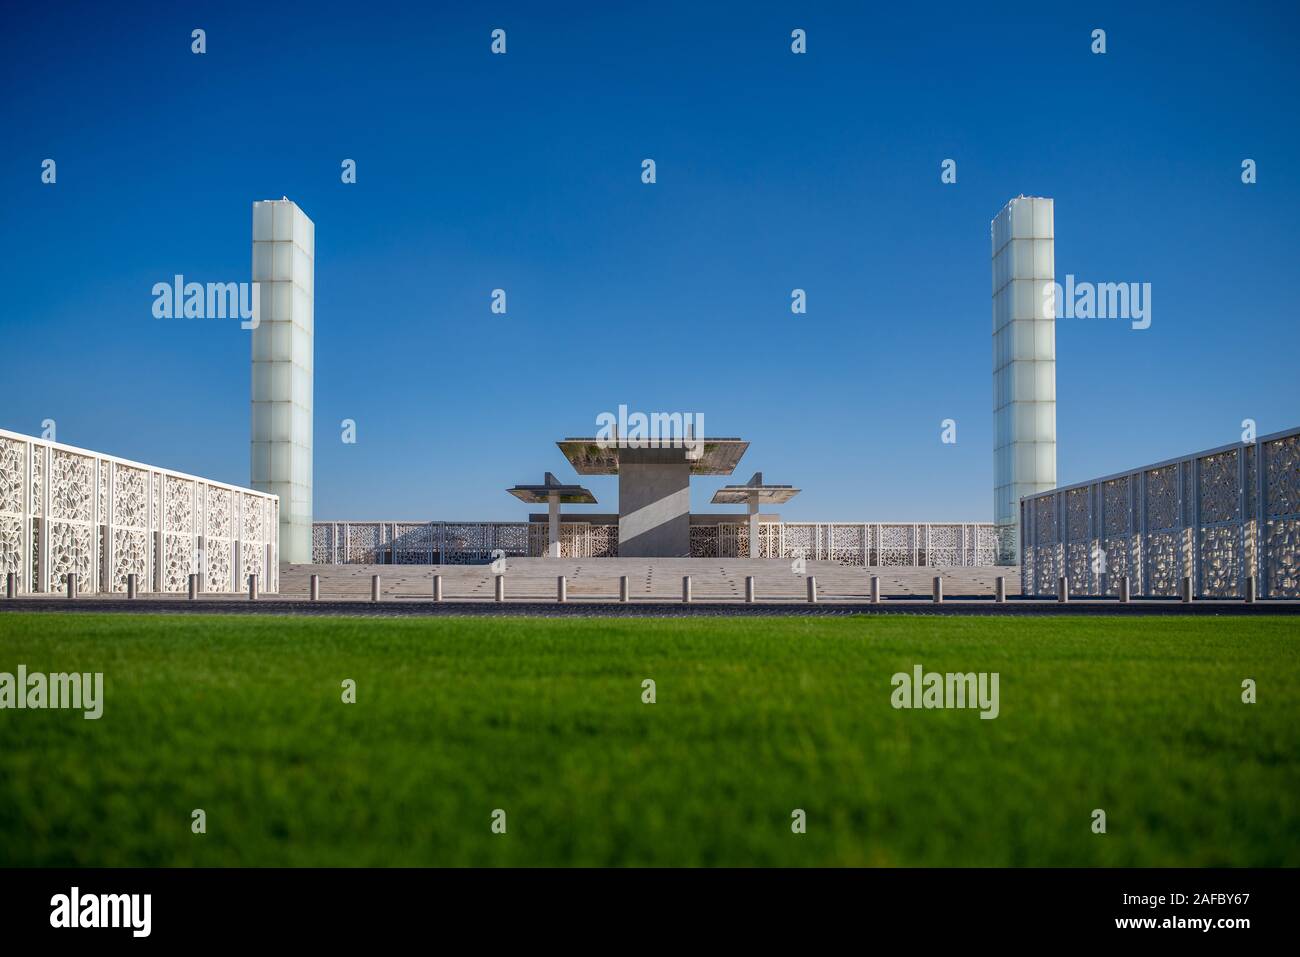 Doha, Qatar - May 26, 2017: The Ceremonial Court, Education City, designed by Arata Isozaki architects, taken during a late spring afternoon Stock Photo